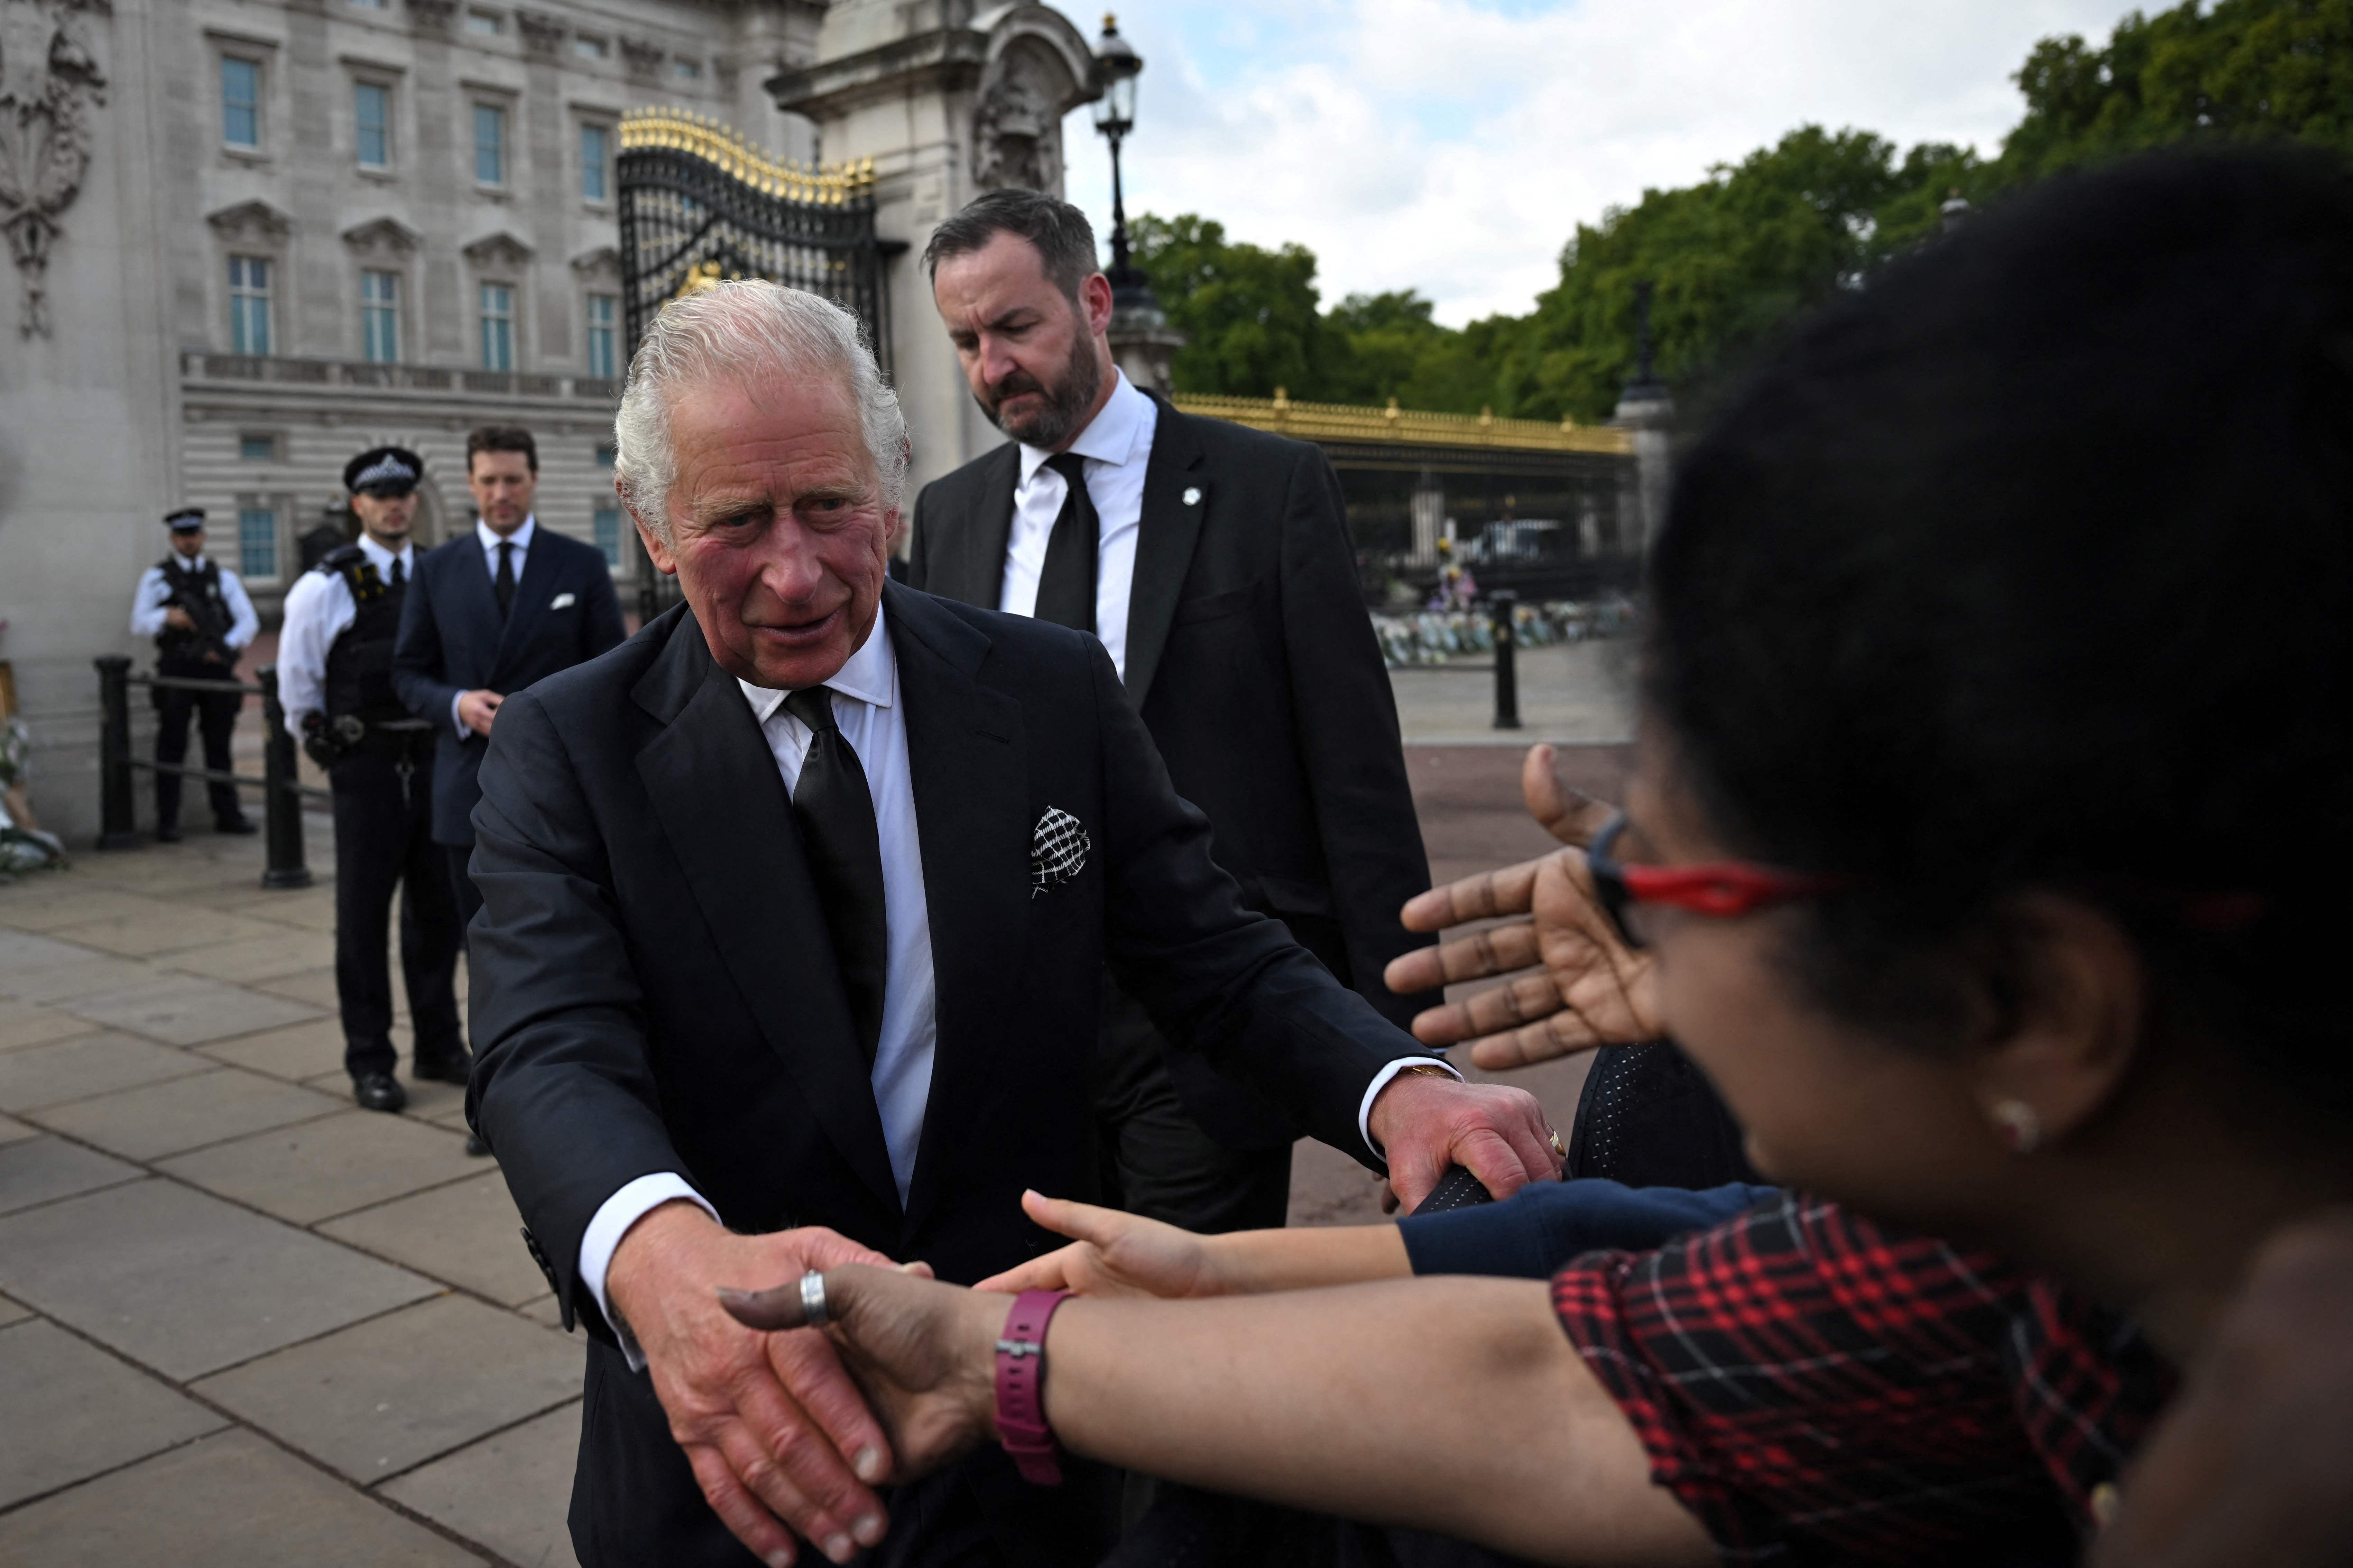 The King shakes the hand of a person at Buckingham Palace